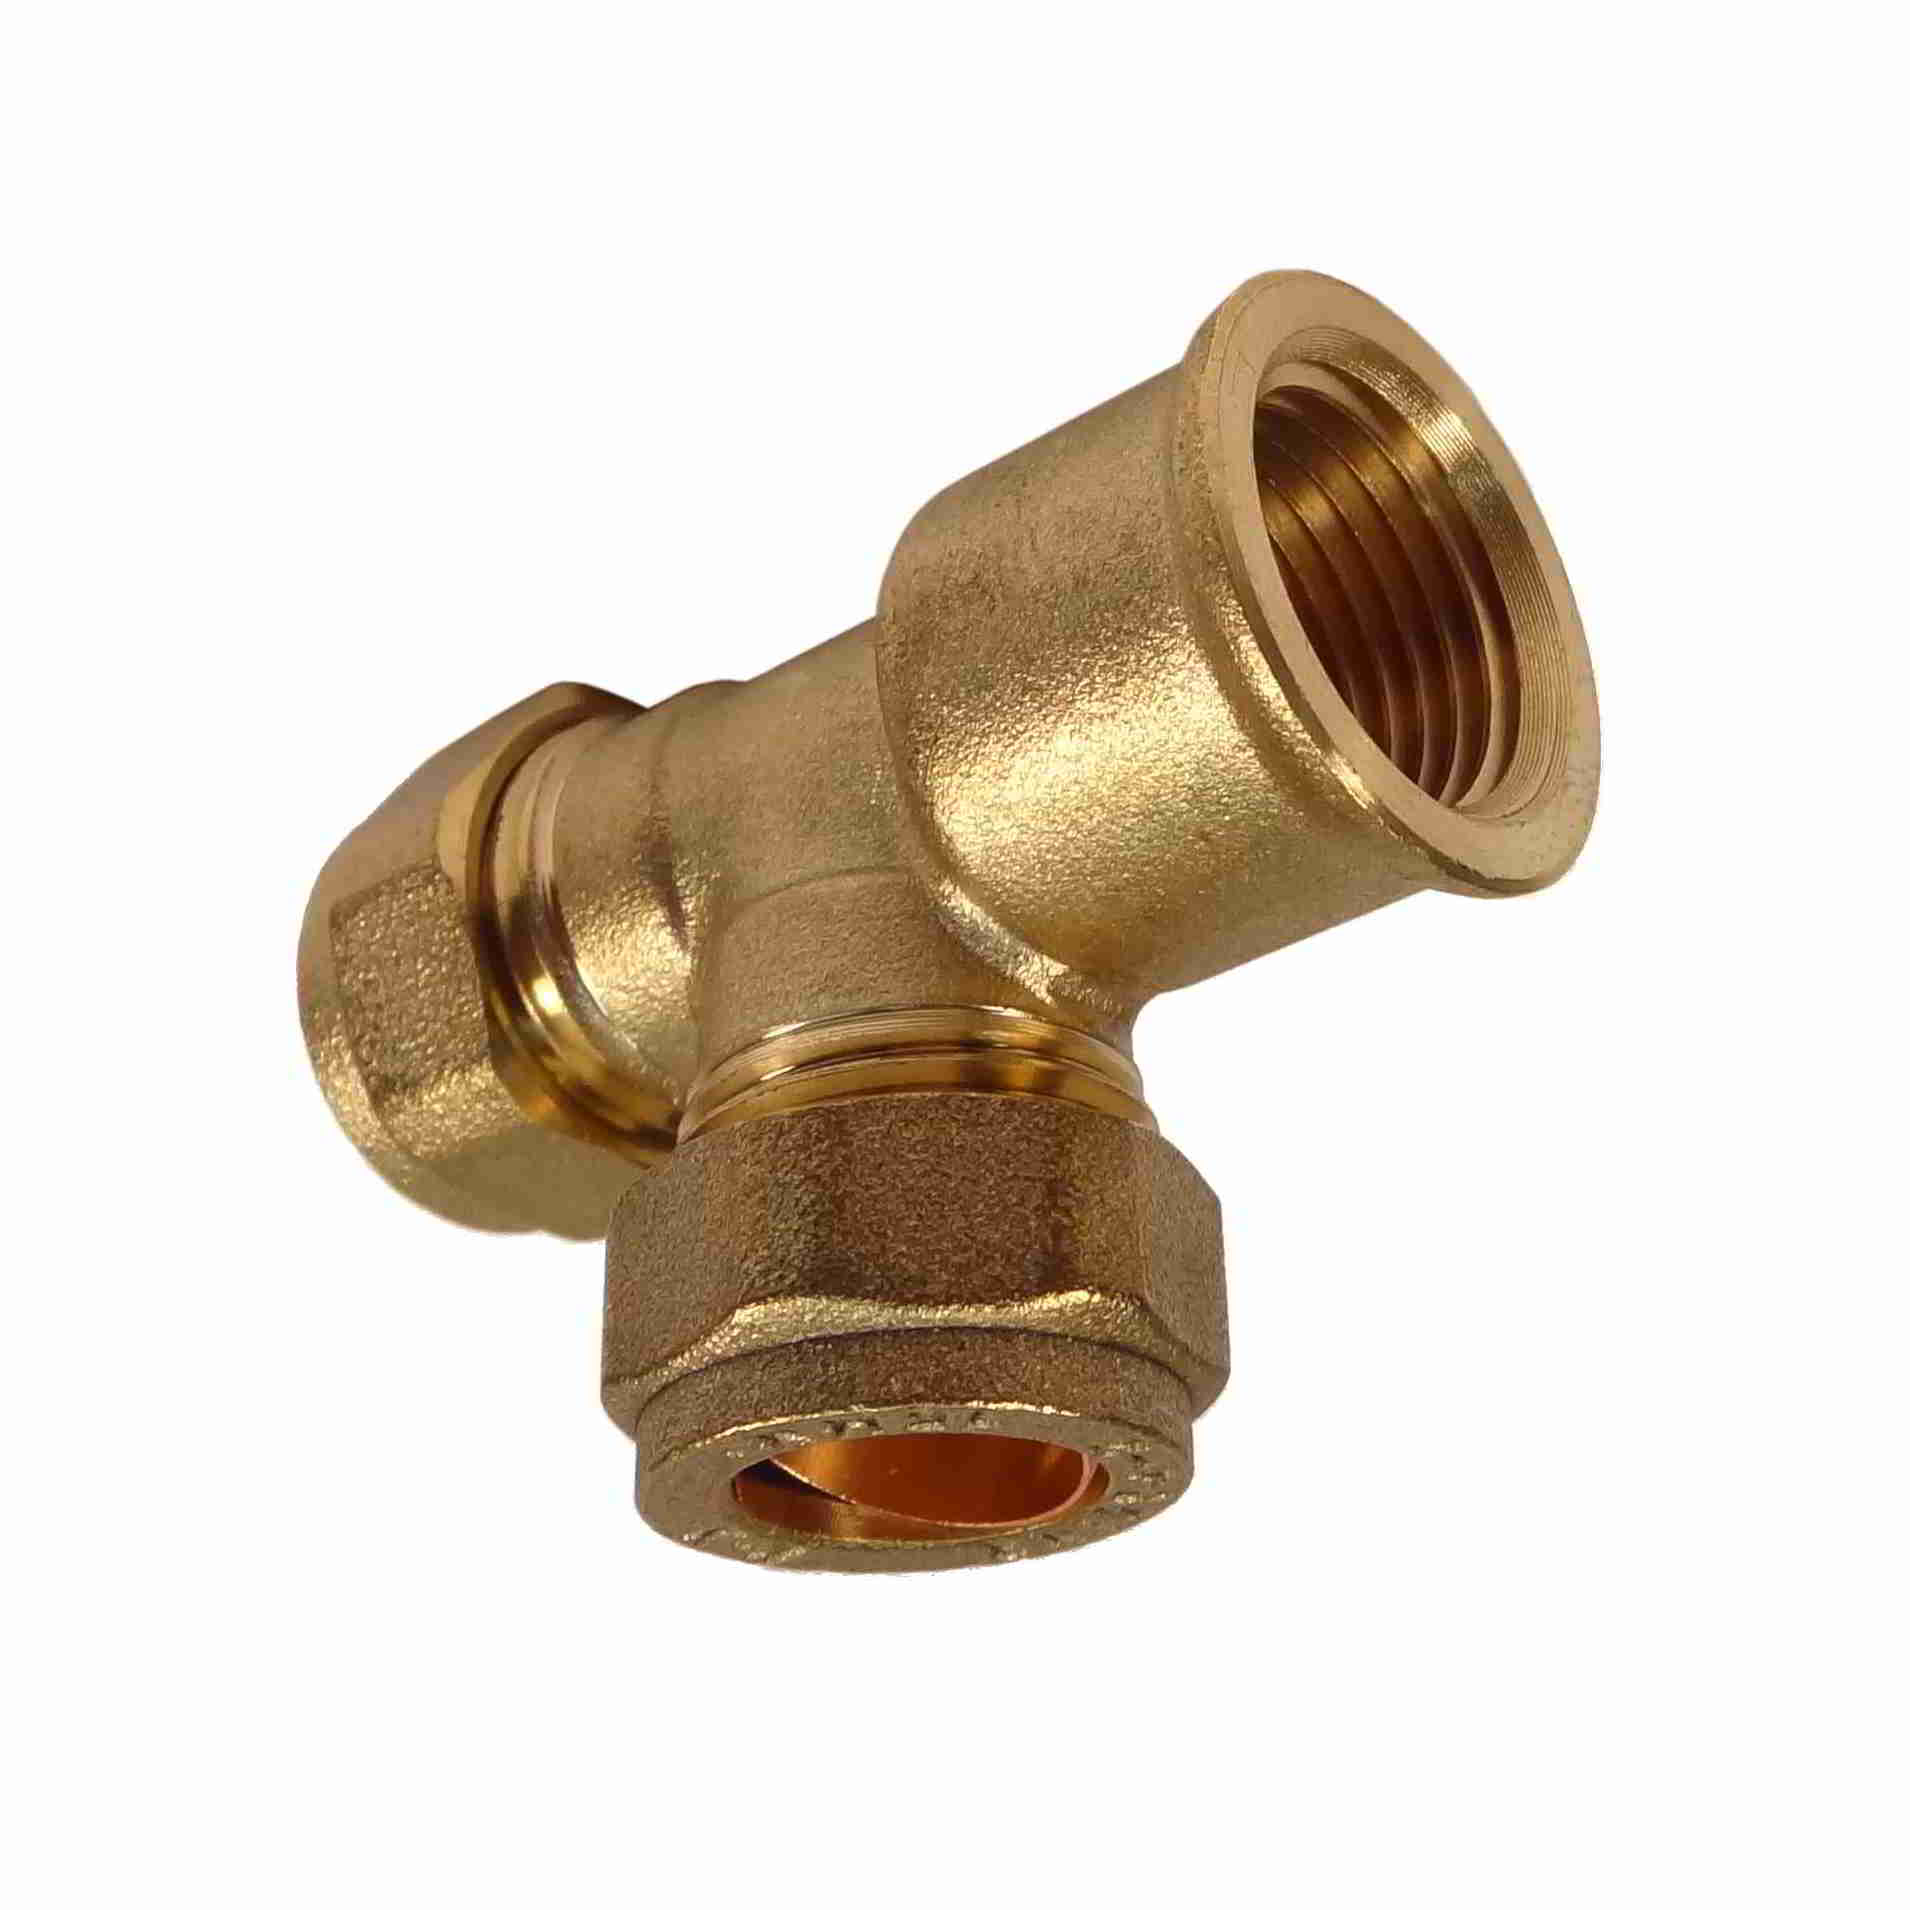 https://www.stevensonplumbing.co.uk/images/source/Plumbing/Compression_fittings/15_half_female_15_compression_tee.jpg